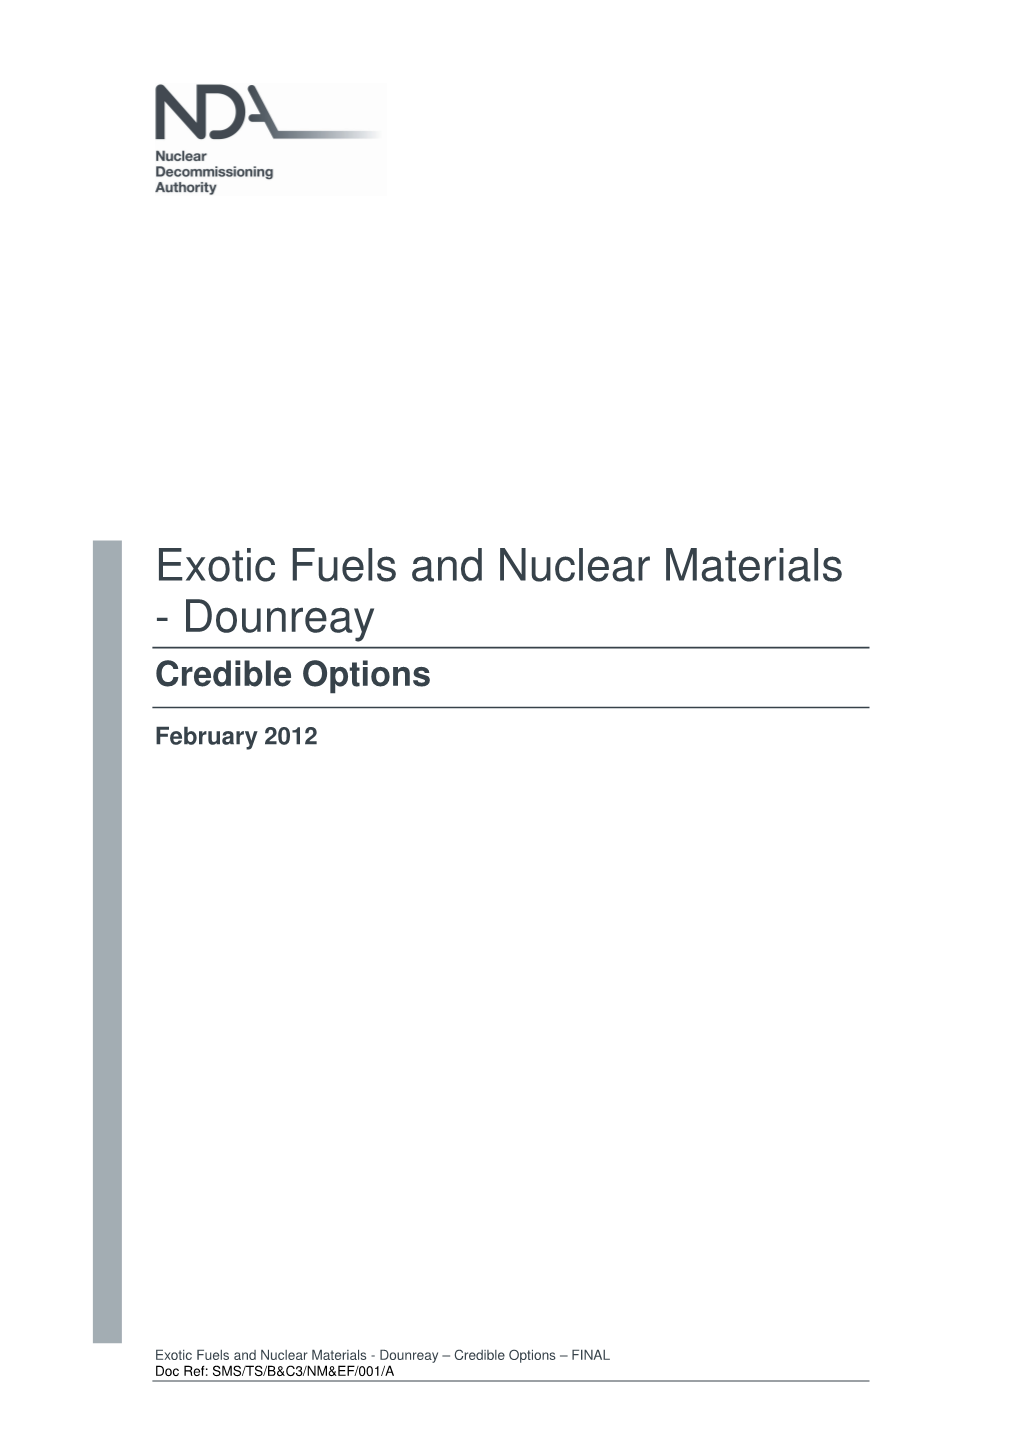 Exotic Fuels and Nuclear Materials – Dounreay: Credible Options